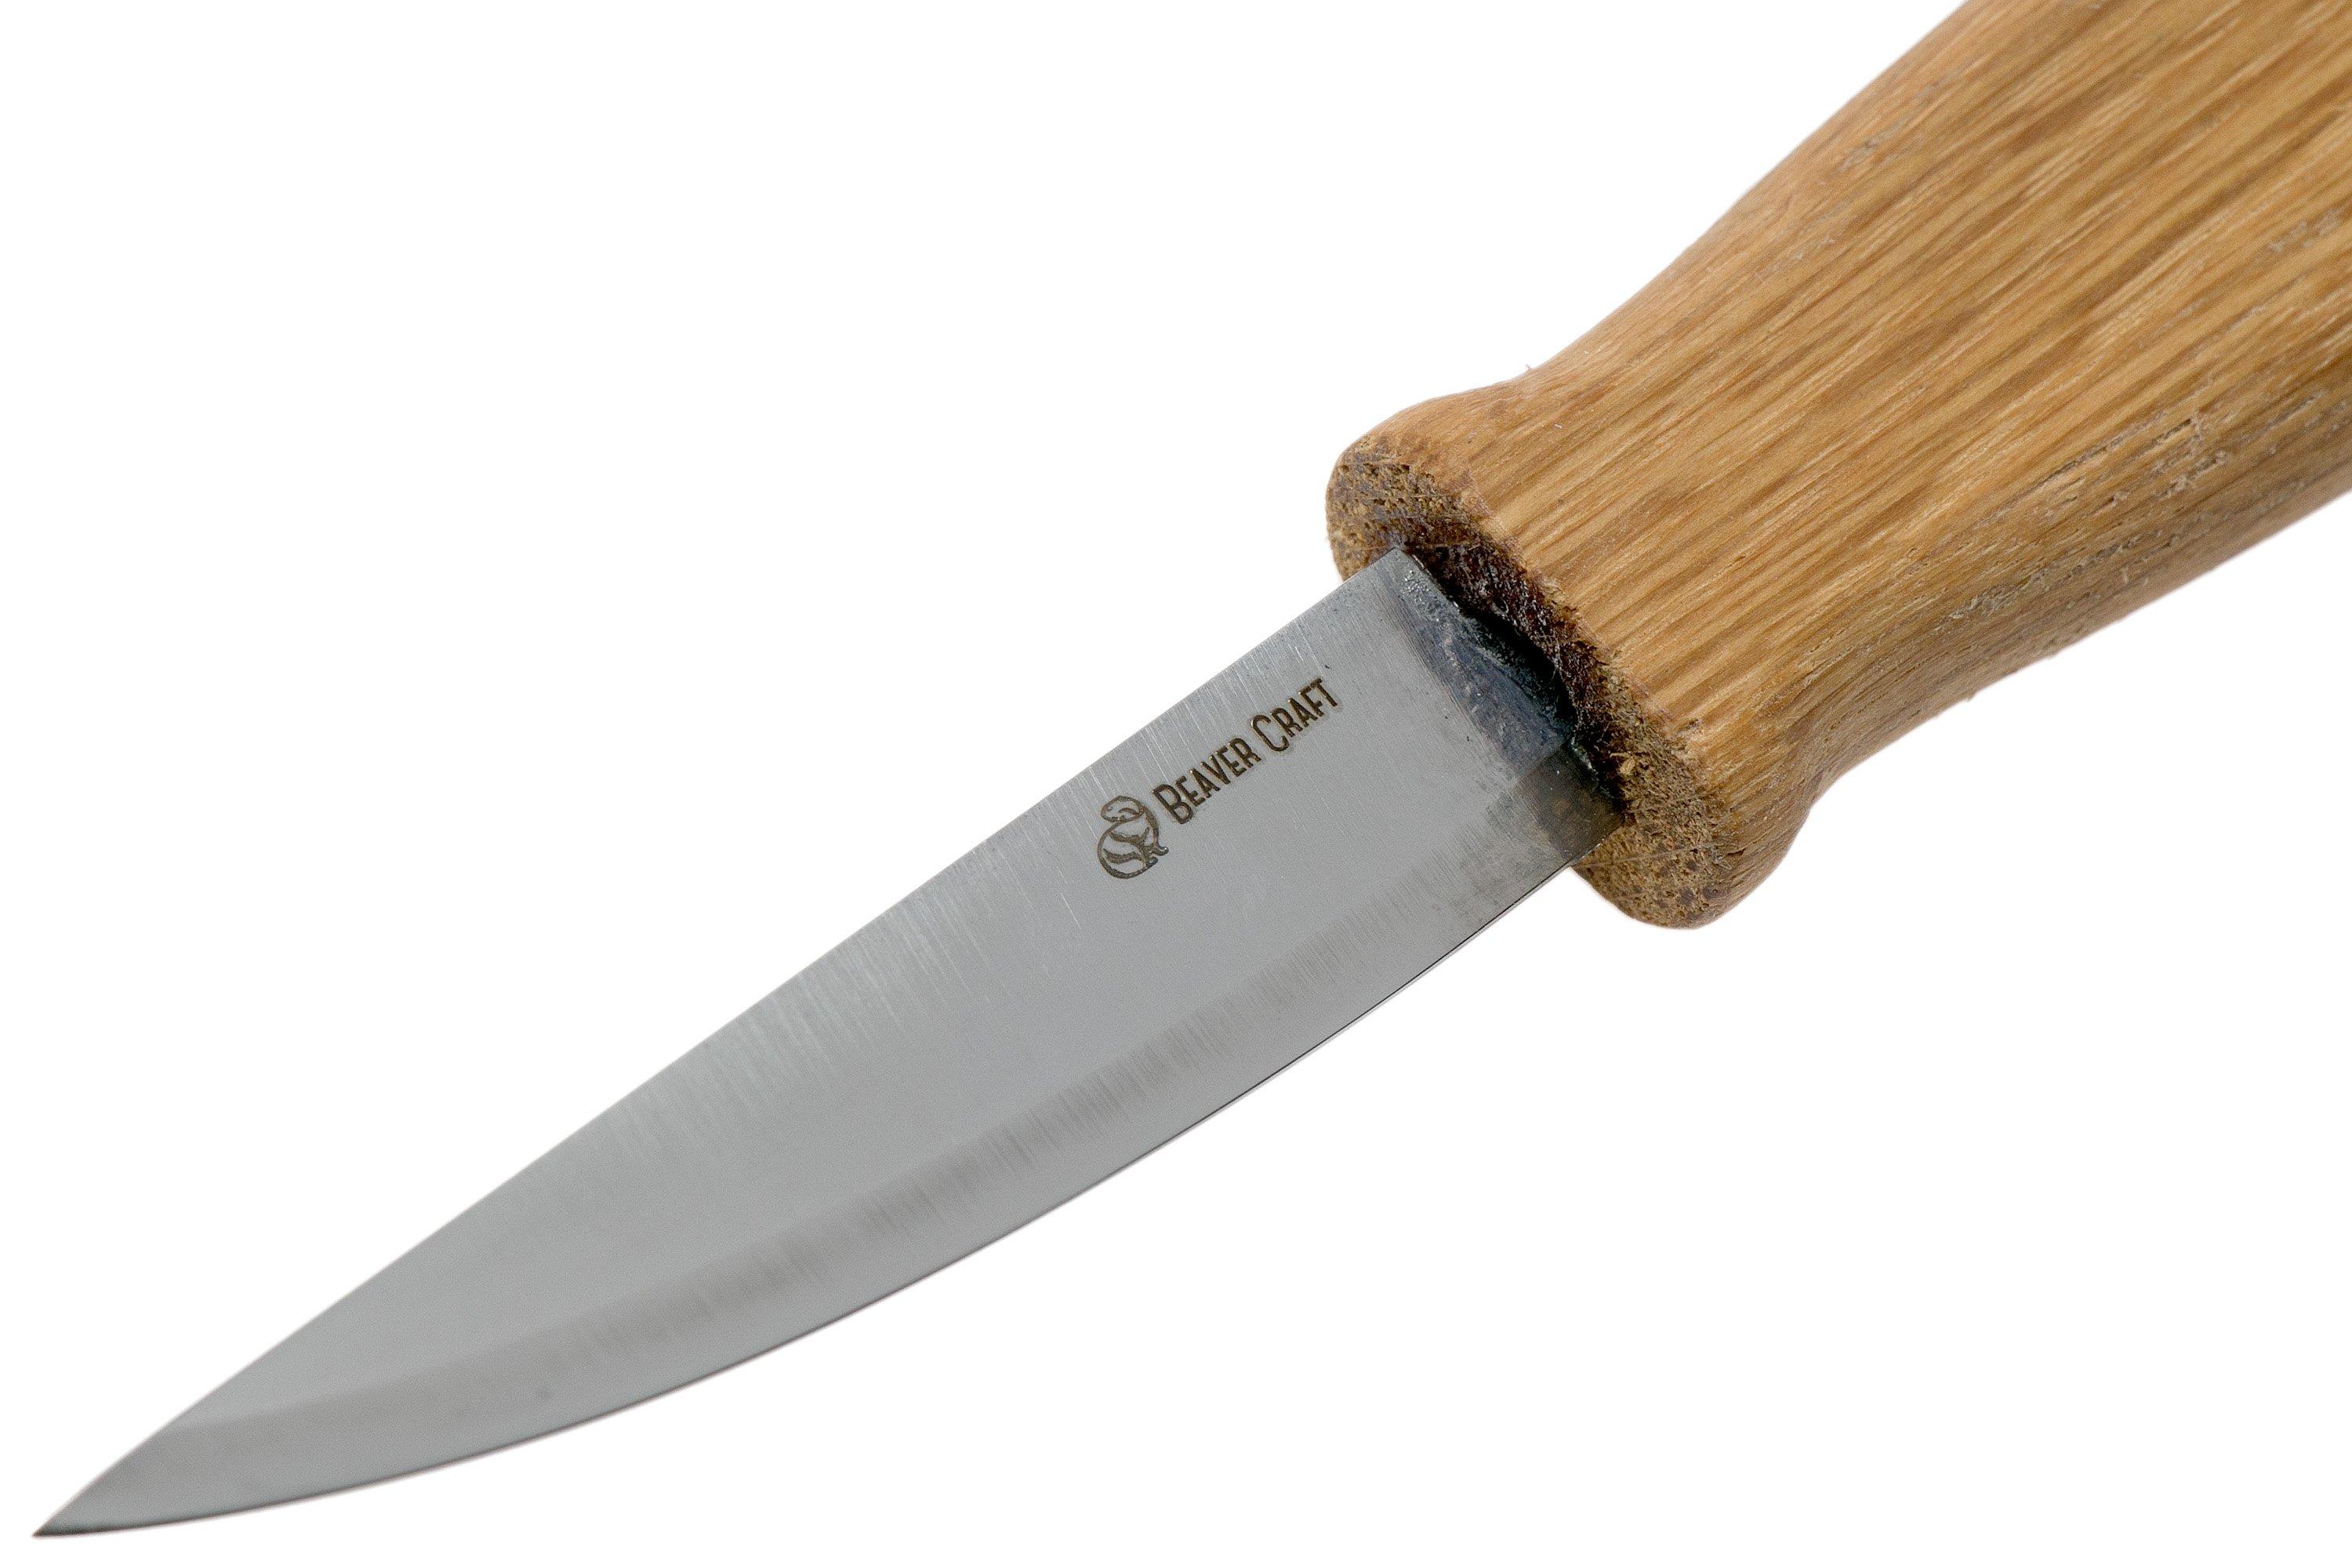 BeaverCraft Sloyd Knife C4 3.14 Wood Carving Sloyd Knife for Whittling and  Roughing for beginners and profi - Durable High carbon steel - Spoon  Carving Tools - Thin Wood Working Whittling Knife 